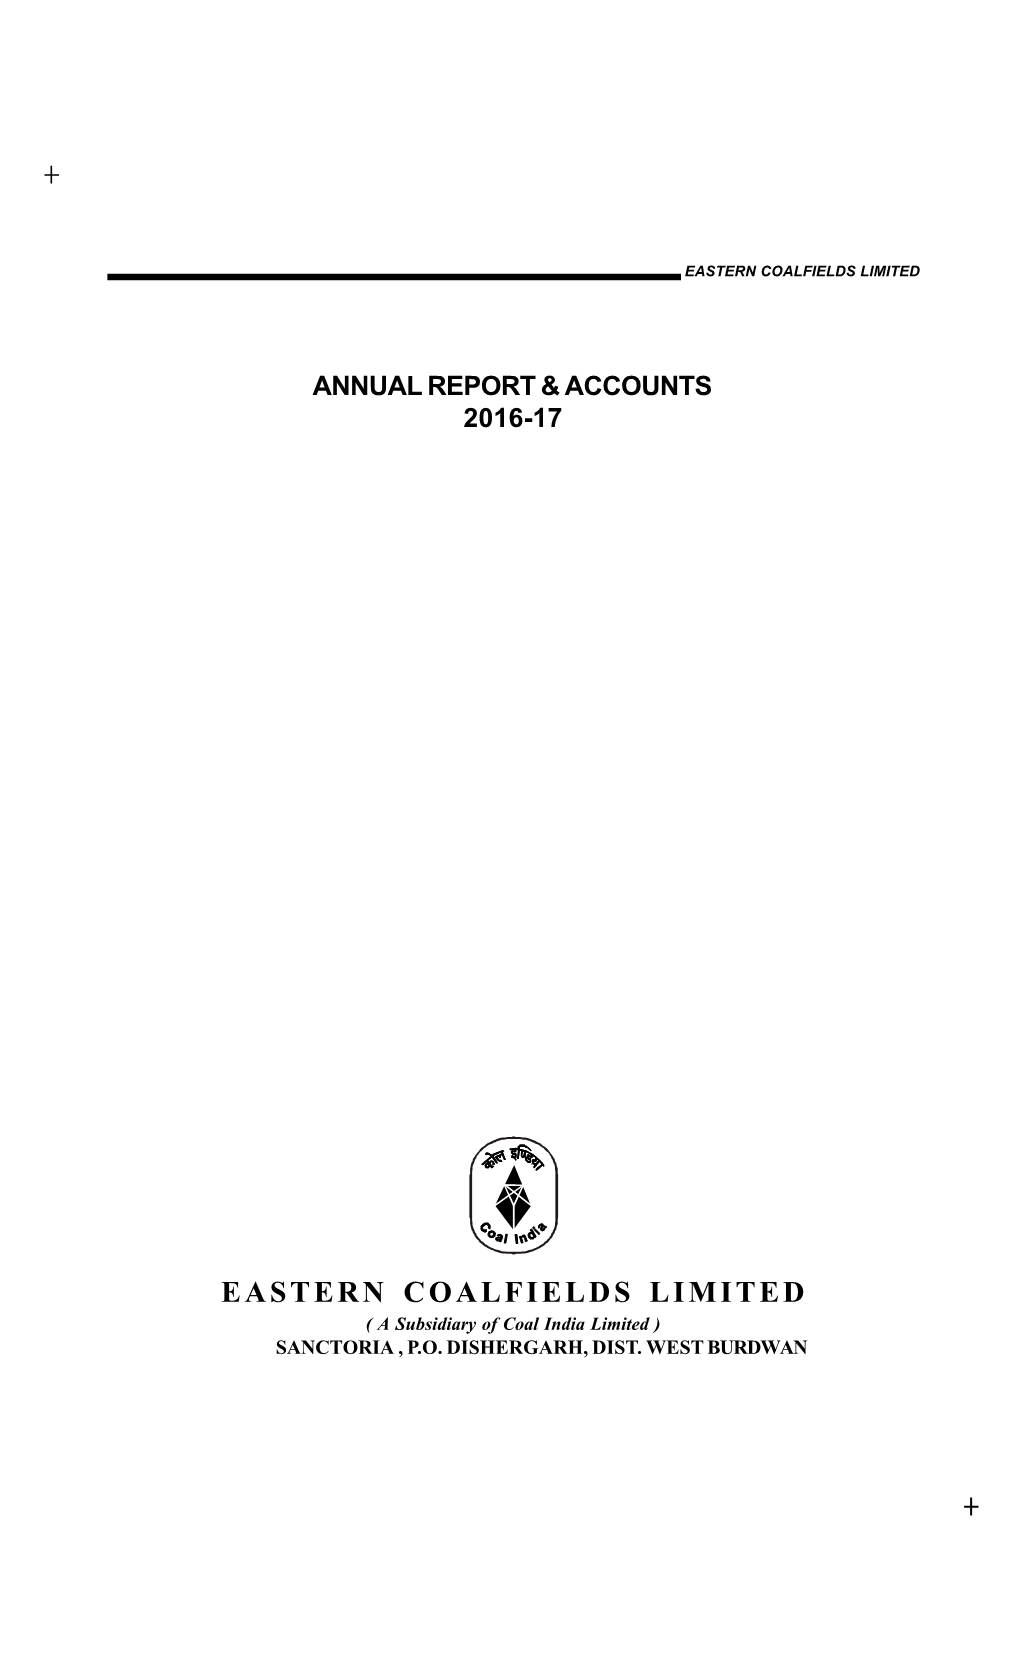 Annual Report & Accounts 2016-17 Eastern Coalfields Limited